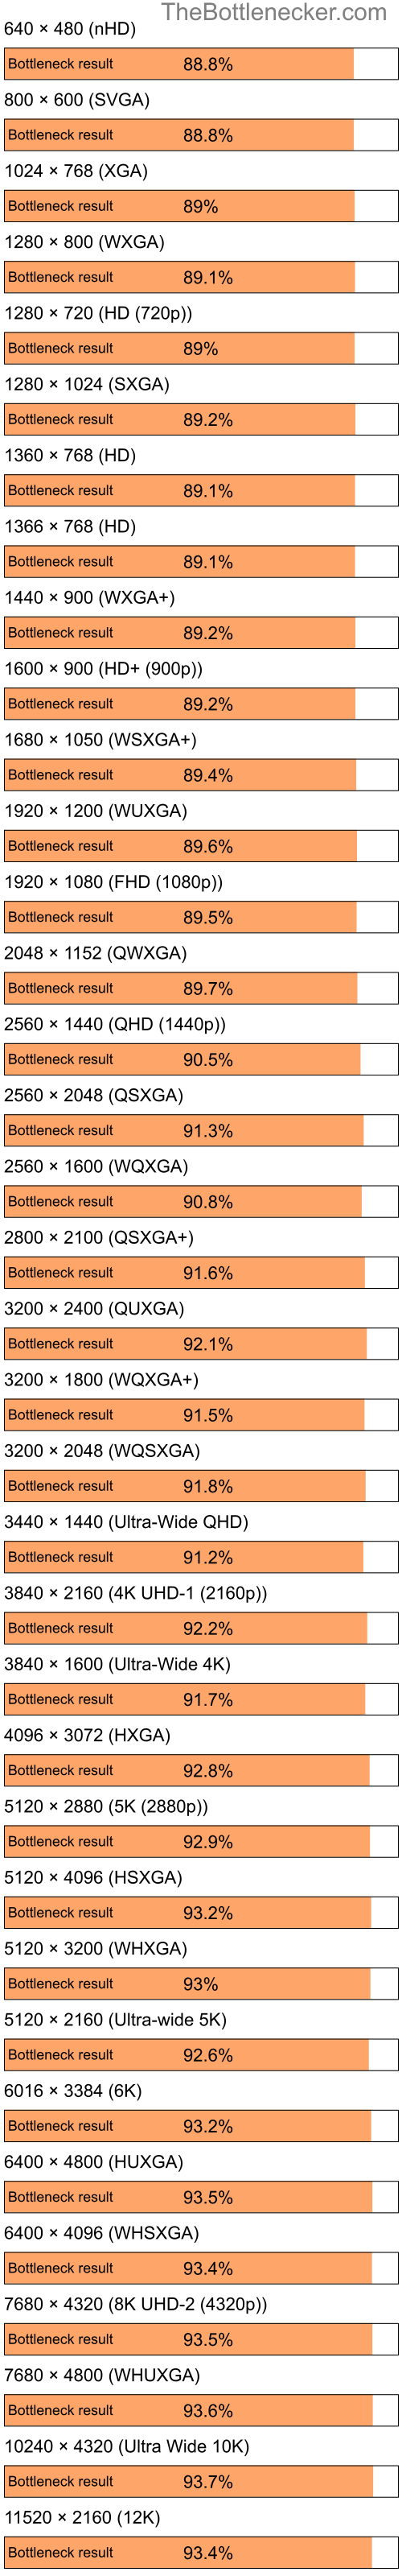 Bottleneck results by resolution for Intel Pentium 4 and NVIDIA GeForce2 MX 200 in Processor Intense Tasks